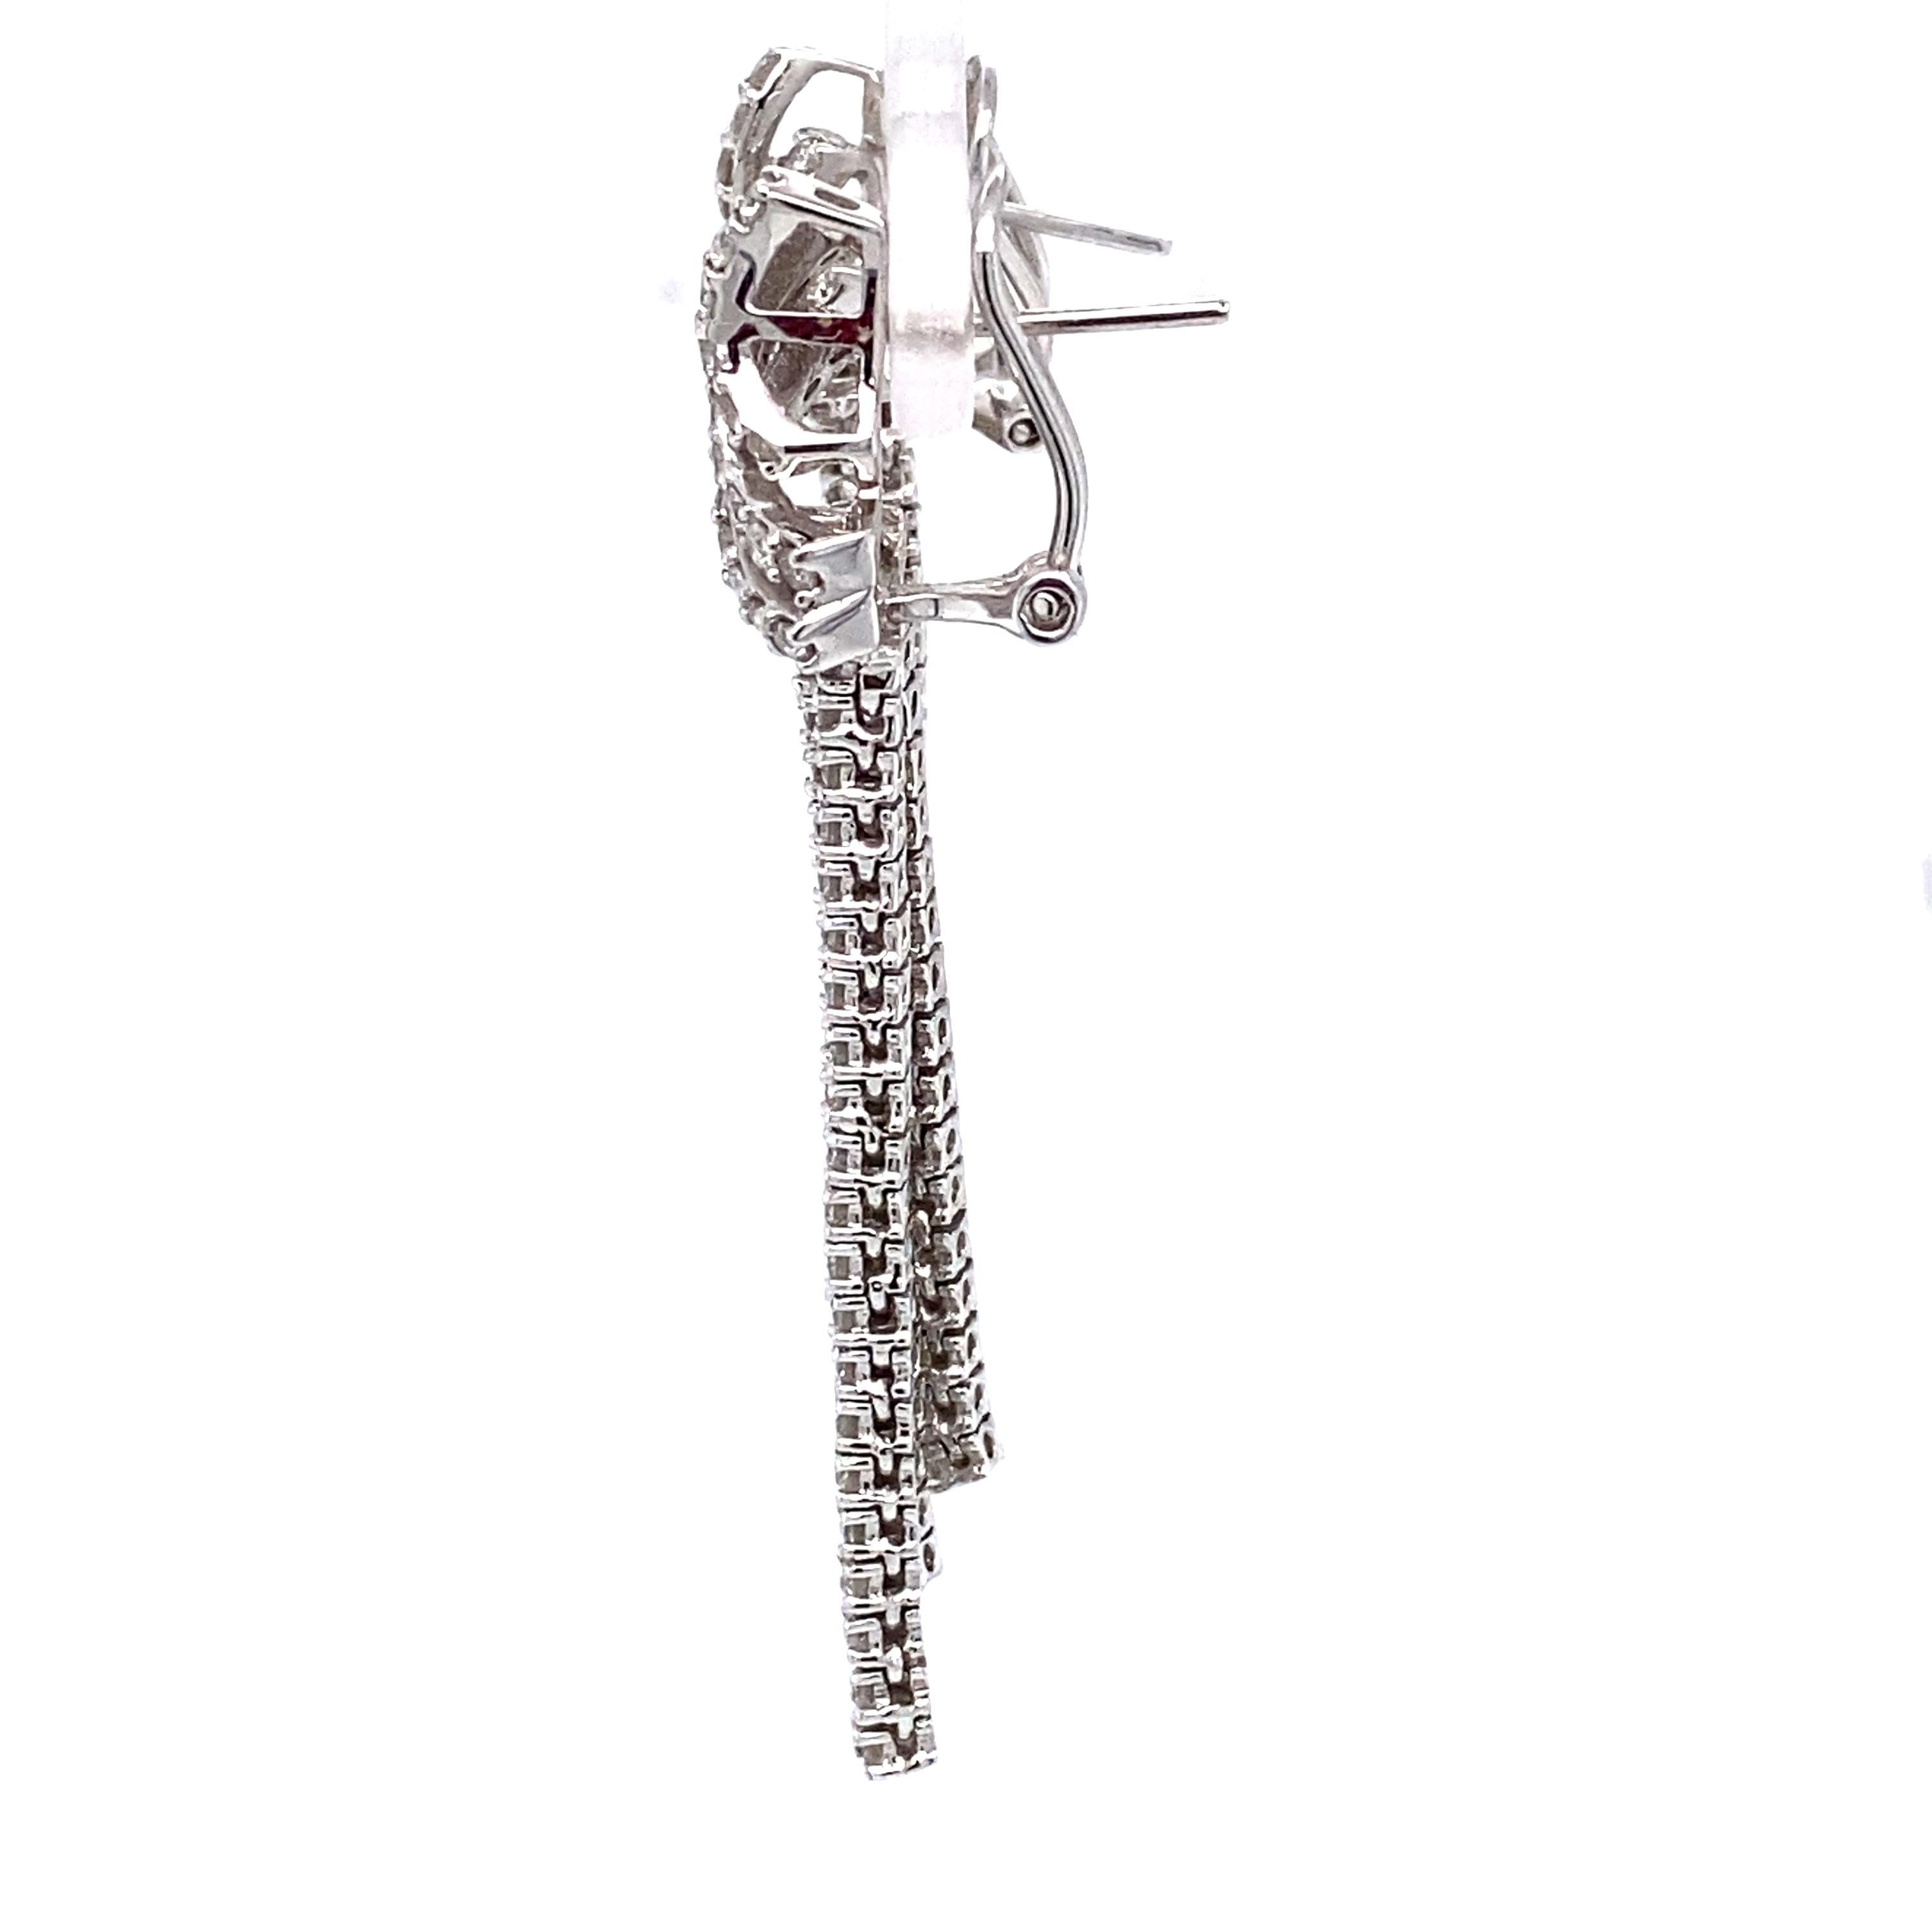 Italian Made 3-Row 3 Carat Total Diamond Dangle Earrings in 18 Karat White Gold In Excellent Condition For Sale In Atlanta, GA